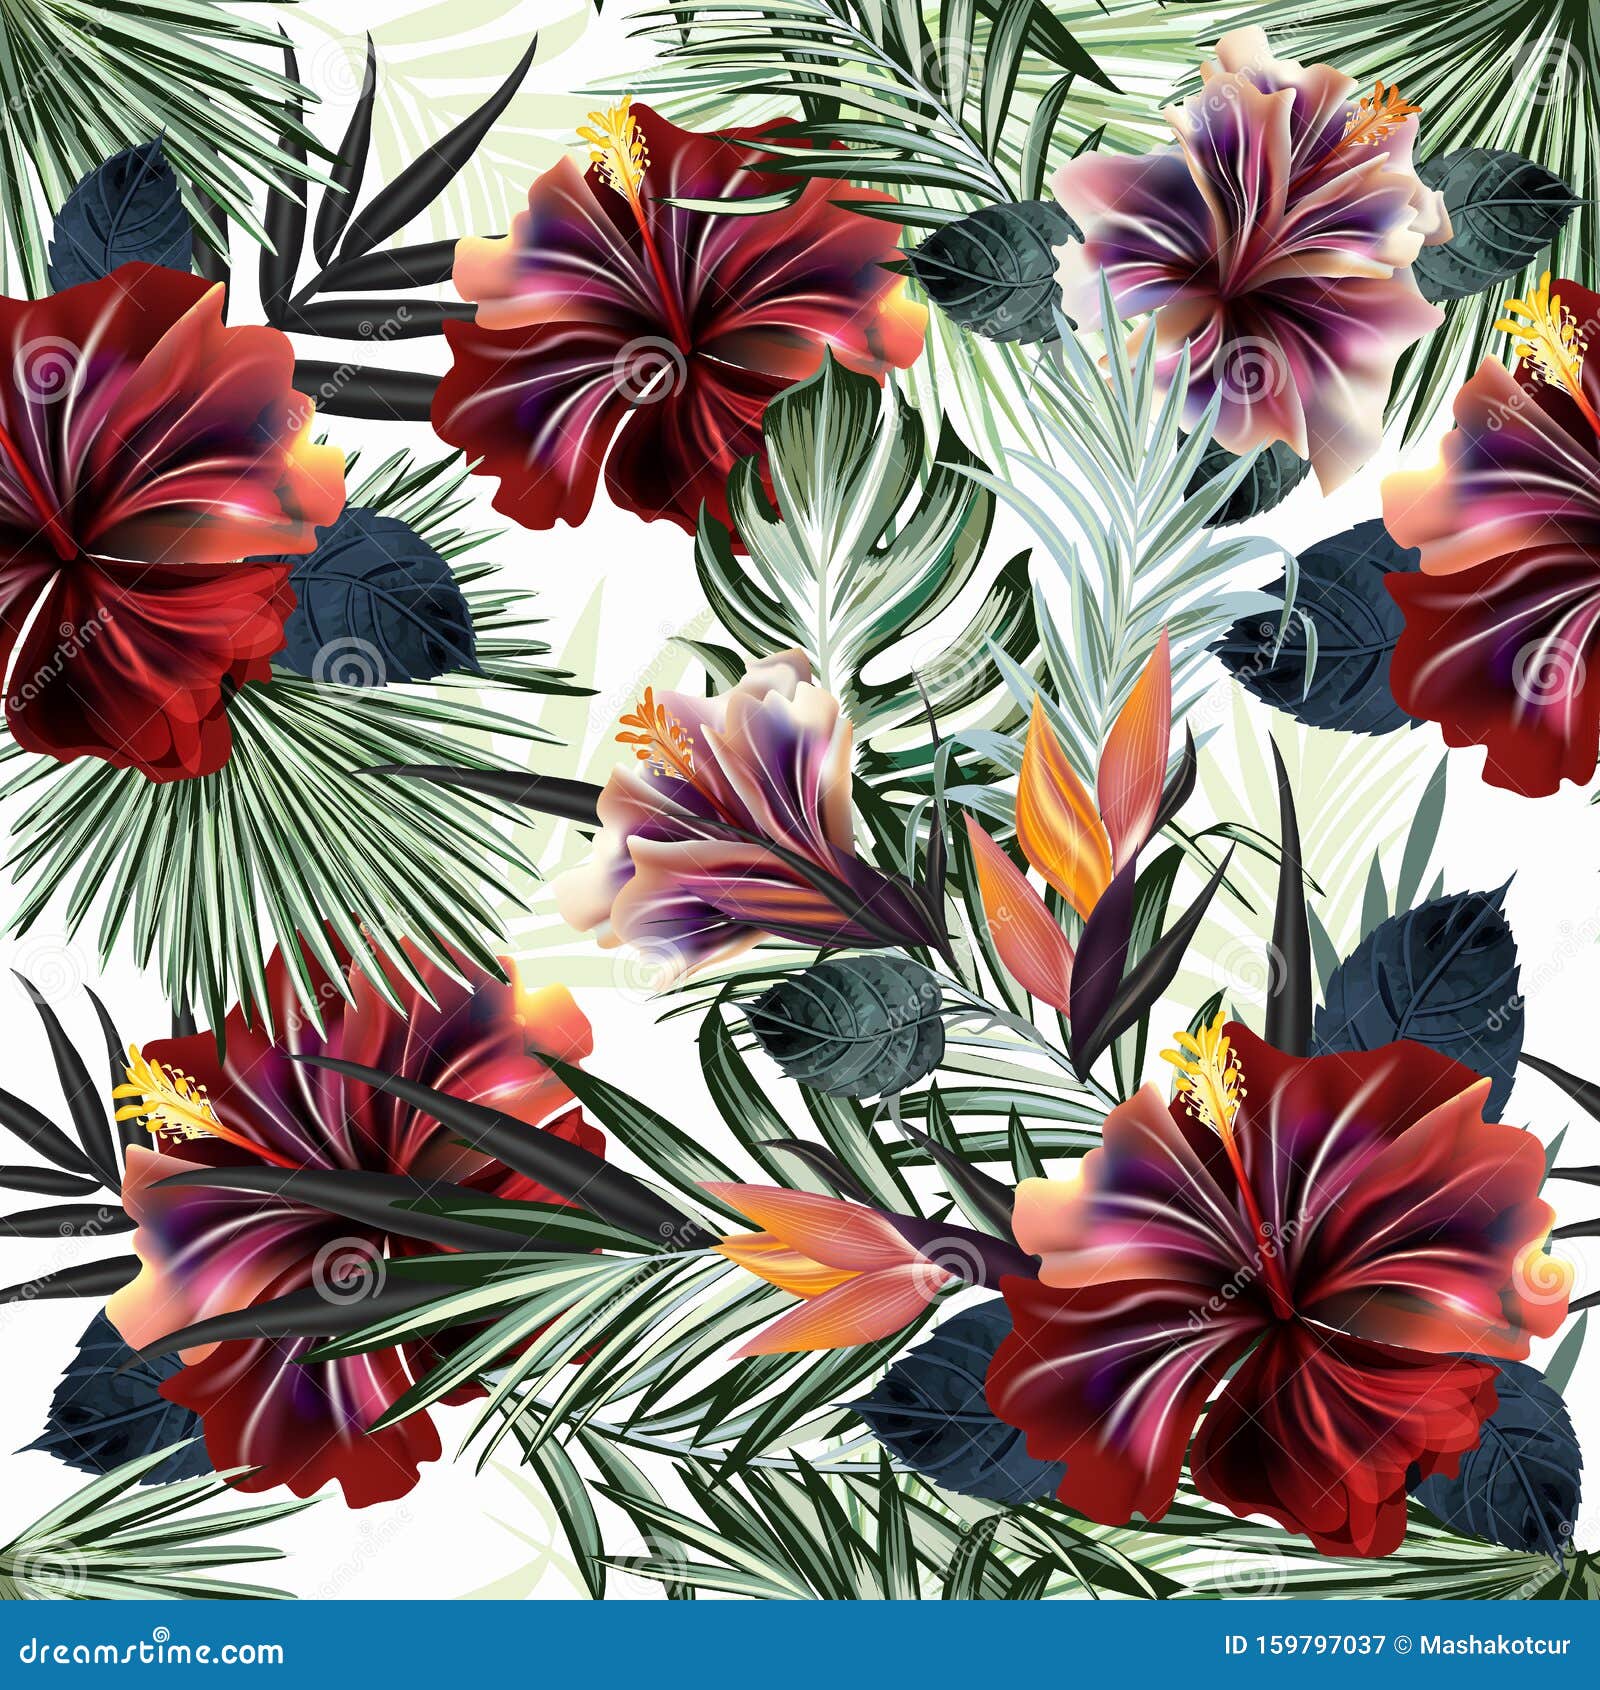 beautiful tropical pattern with green palm leaves and hibiscus flowers  ideal for fabric